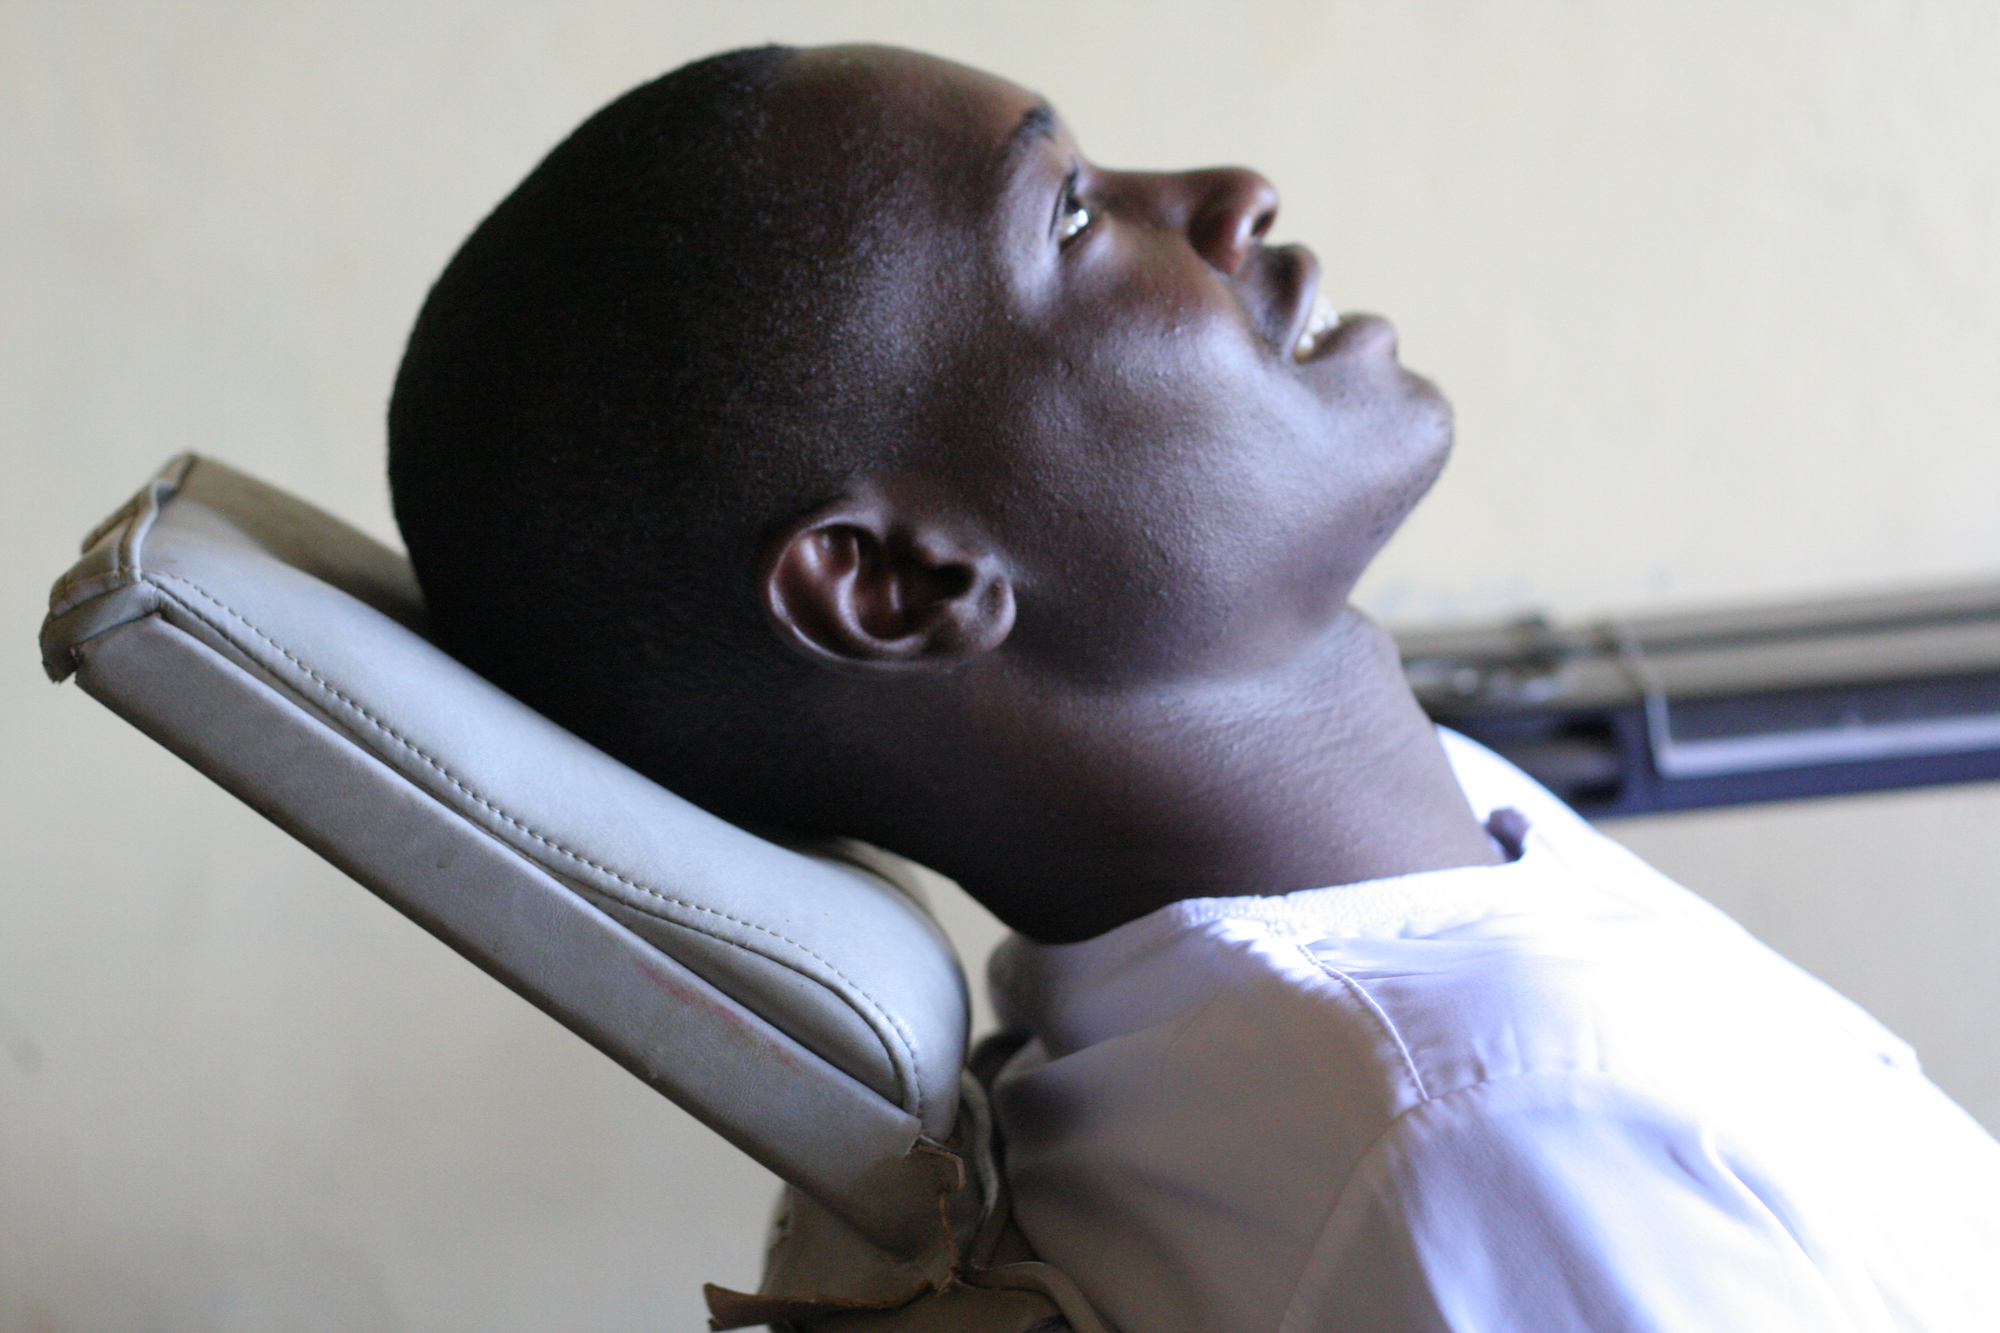 Profile of man sitting in dentist chair